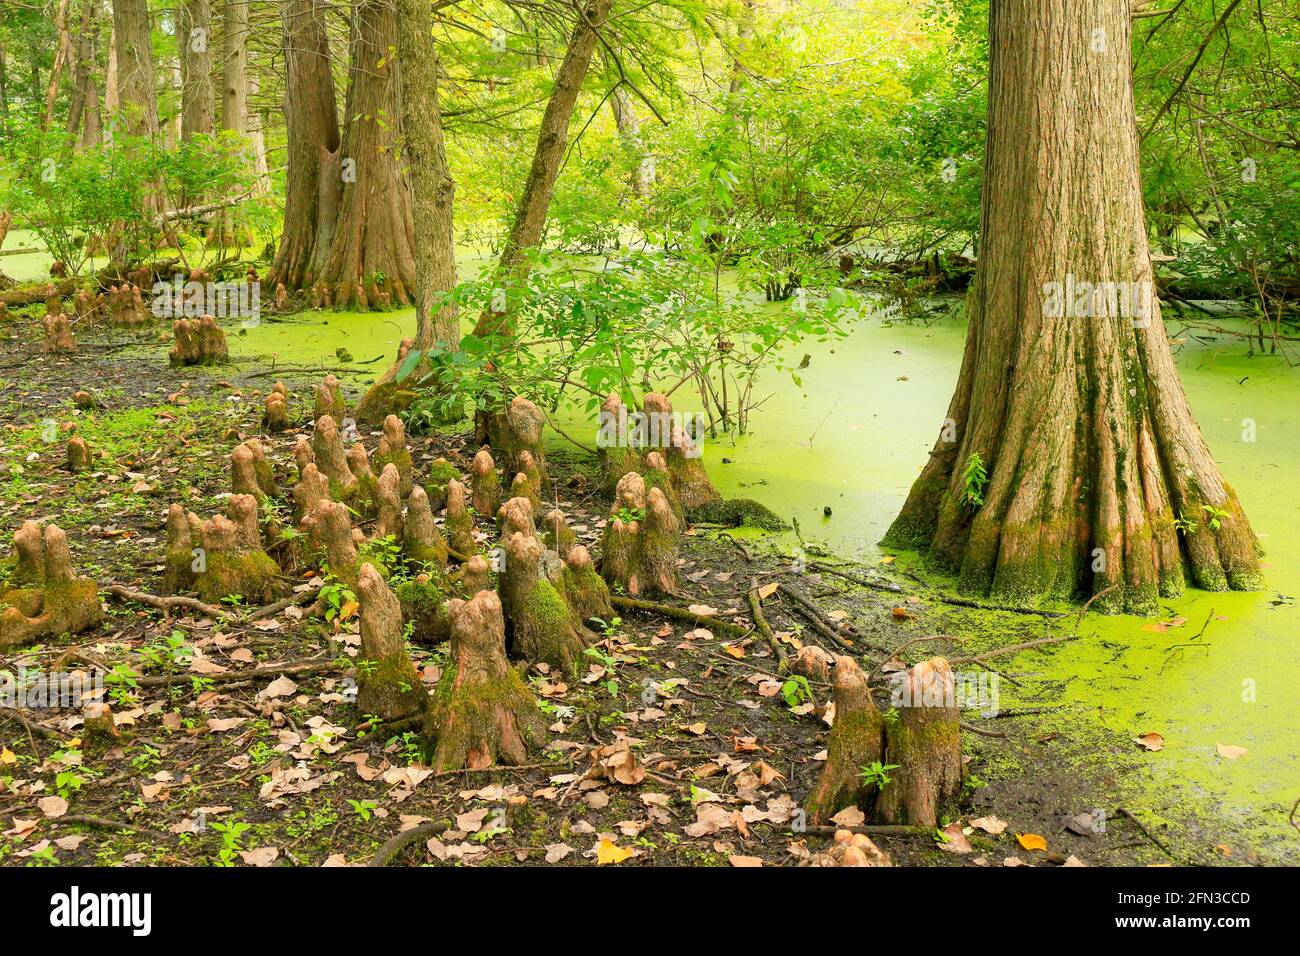 Bald cypress trees and cypress knees. Salt Creek Nature Preserve, Cook County, Illinois. Stock Photo